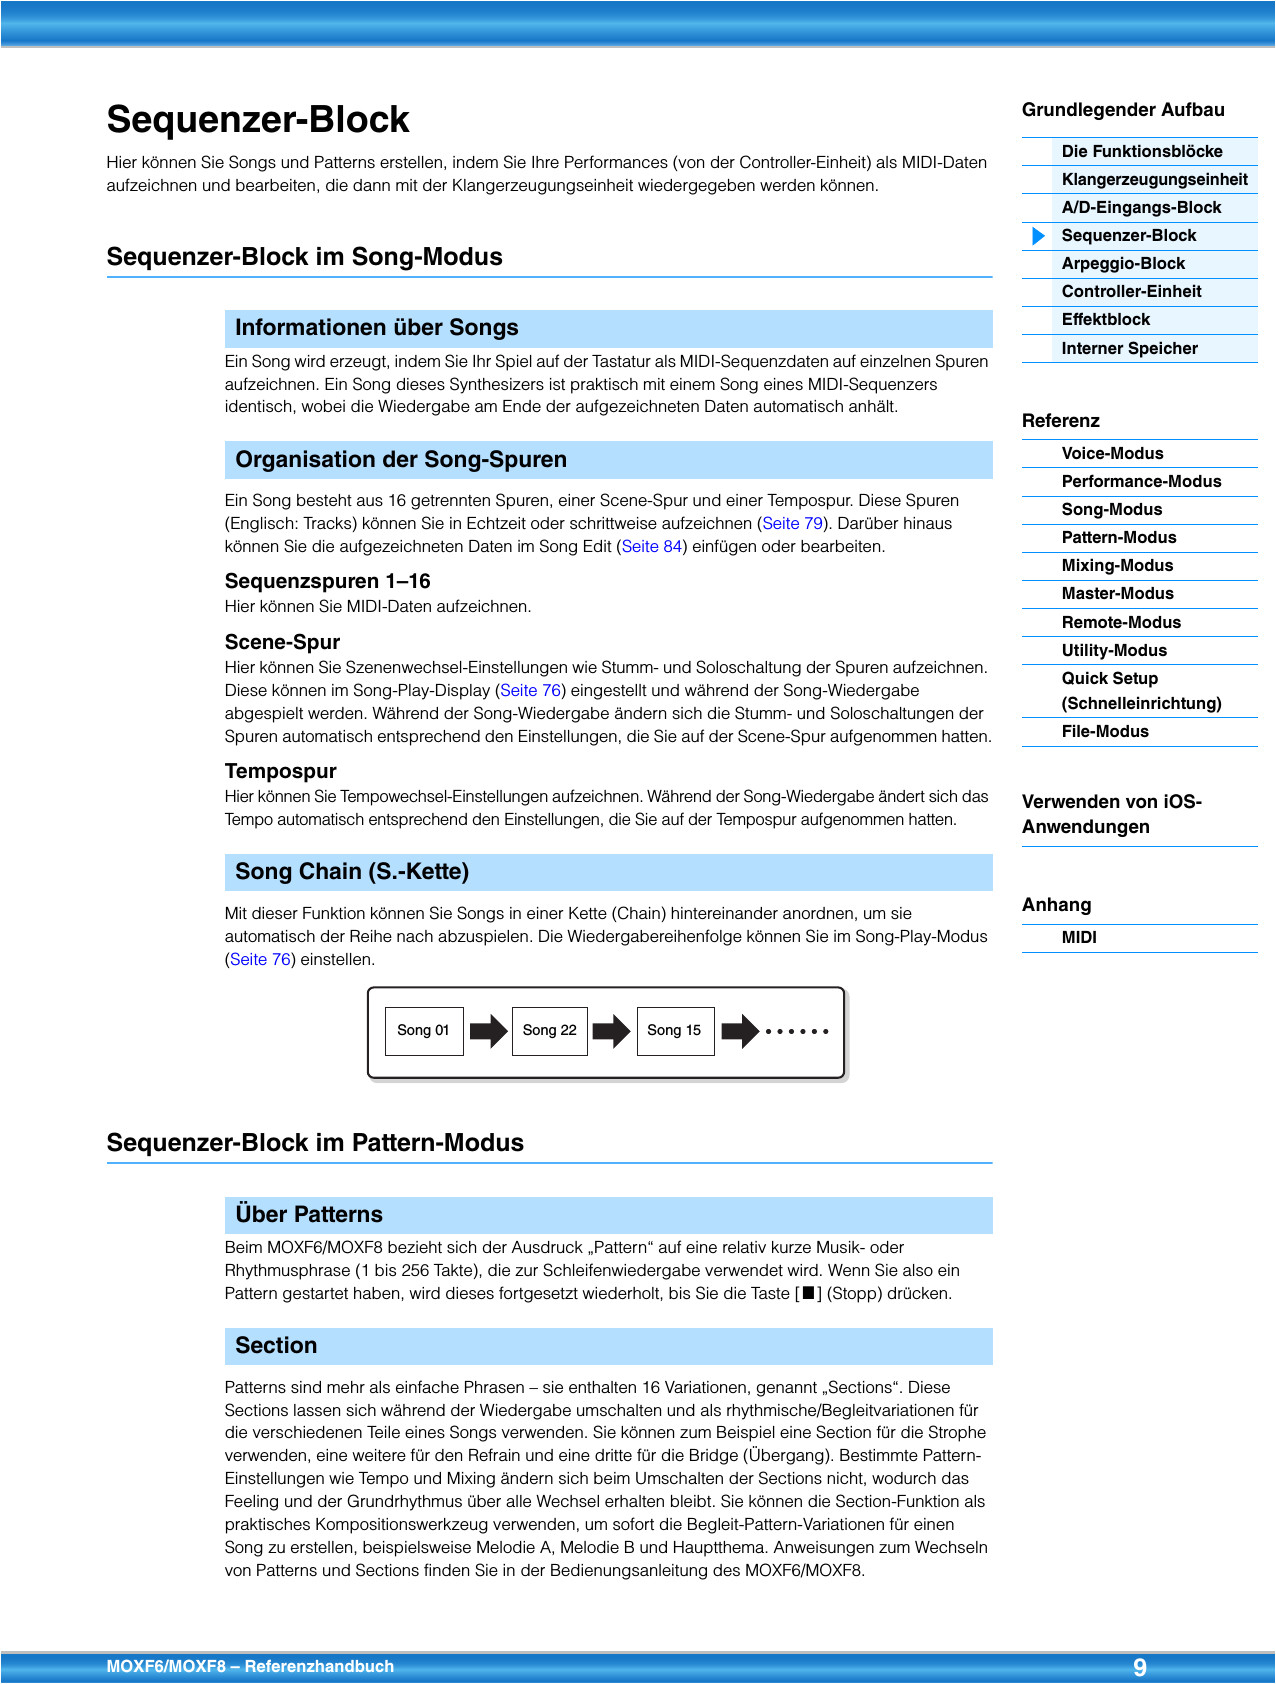 moxf6moxf8derma0 748796938 user guide page 9 png